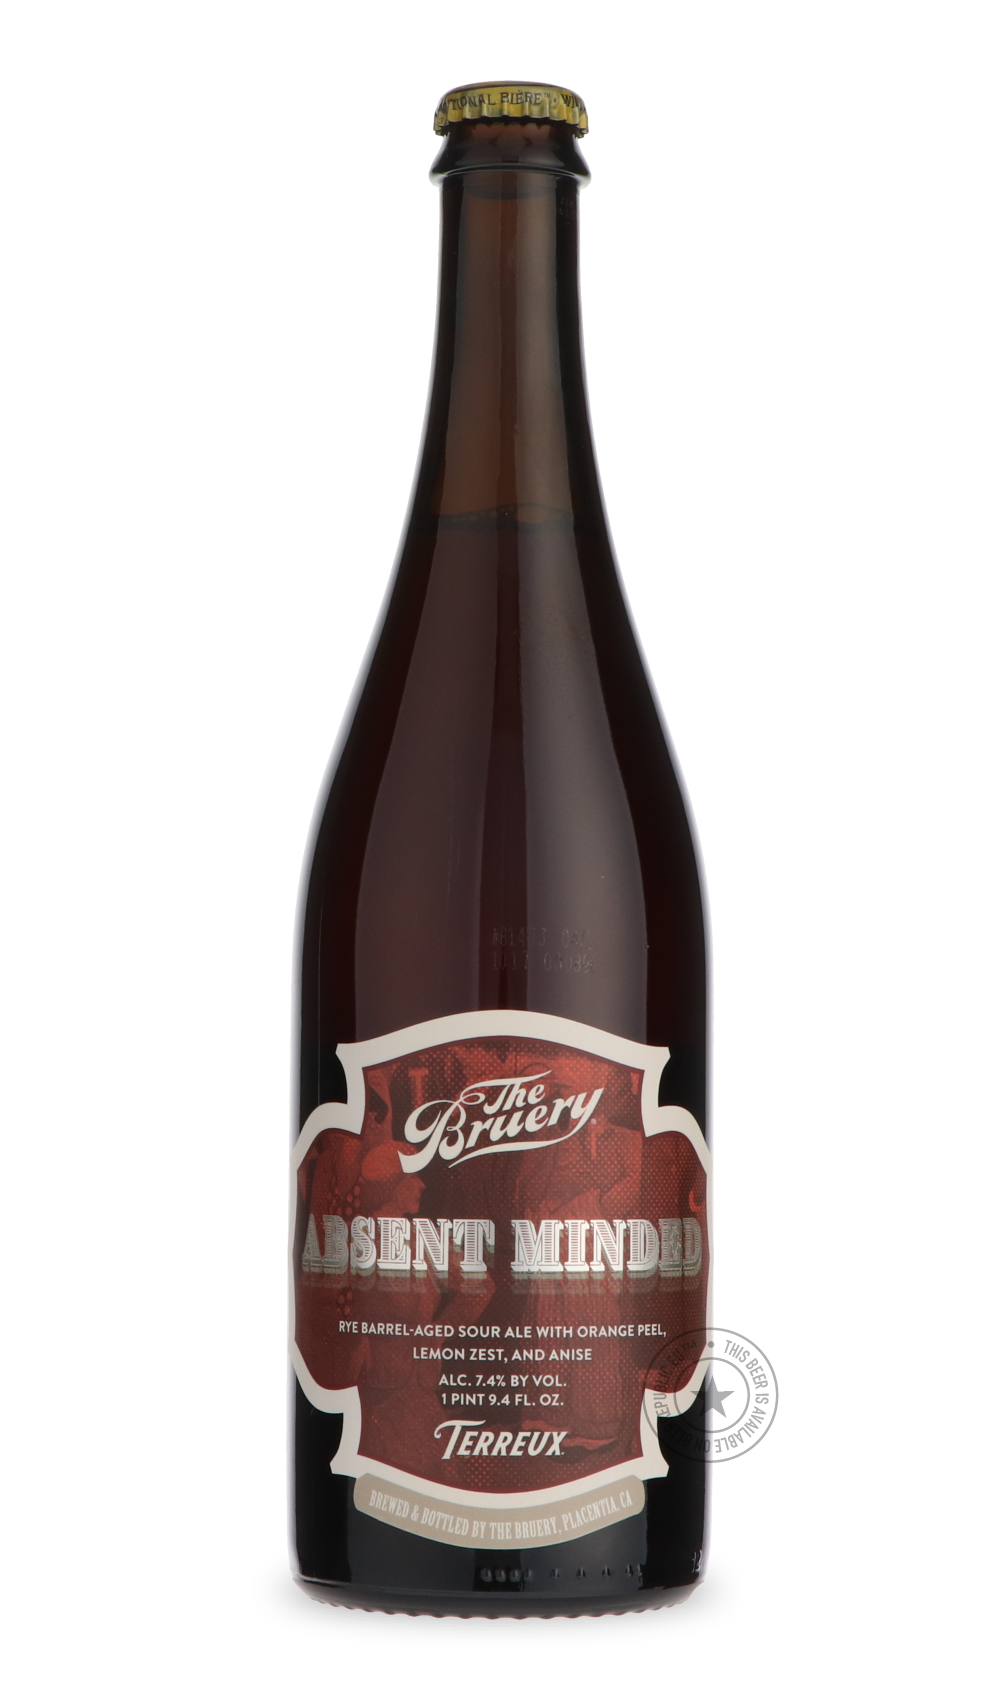 -The Bruery- Terreux Absent Minded-Sour / Wild & Fruity- Only @ Beer Republic - The best online beer store for American & Canadian craft beer - Buy beer online from the USA and Canada - Bier online kopen - Amerikaans bier kopen - Craft beer store - Craft beer kopen - Amerikanisch bier kaufen - Bier online kaufen - Acheter biere online - IPA - Stout - Porter - New England IPA - Hazy IPA - Imperial Stout - Barrel Aged - Barrel Aged Imperial Stout - Brown - Dark beer - Blond - Blonde - Pilsner - Lager - Wheat 